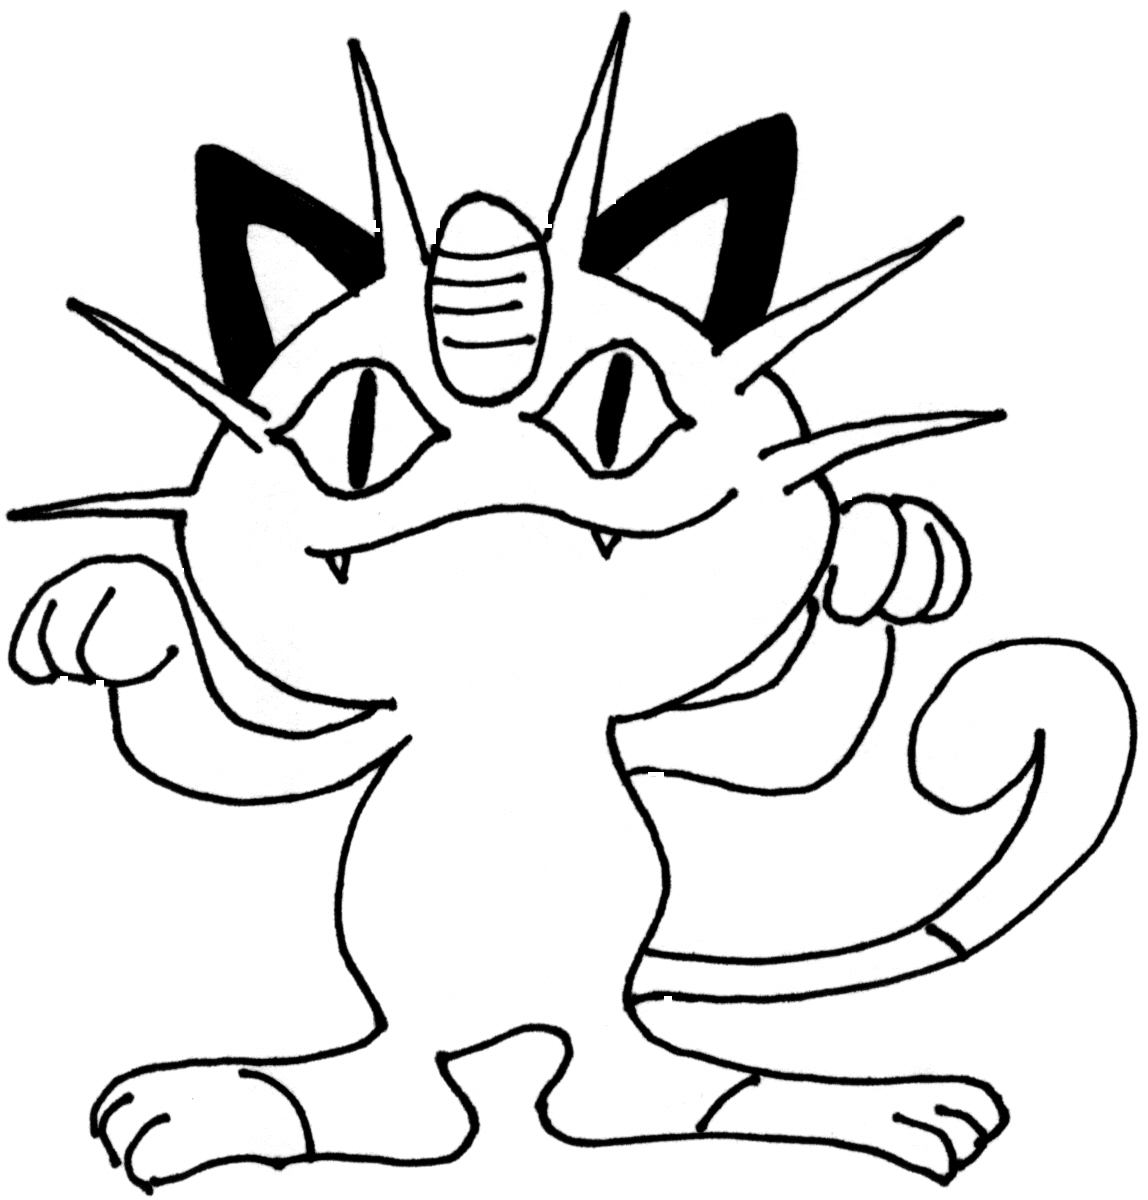 Cat Pokemon Coloring Pages | Coloring pages for kids | Kids coloring pages |